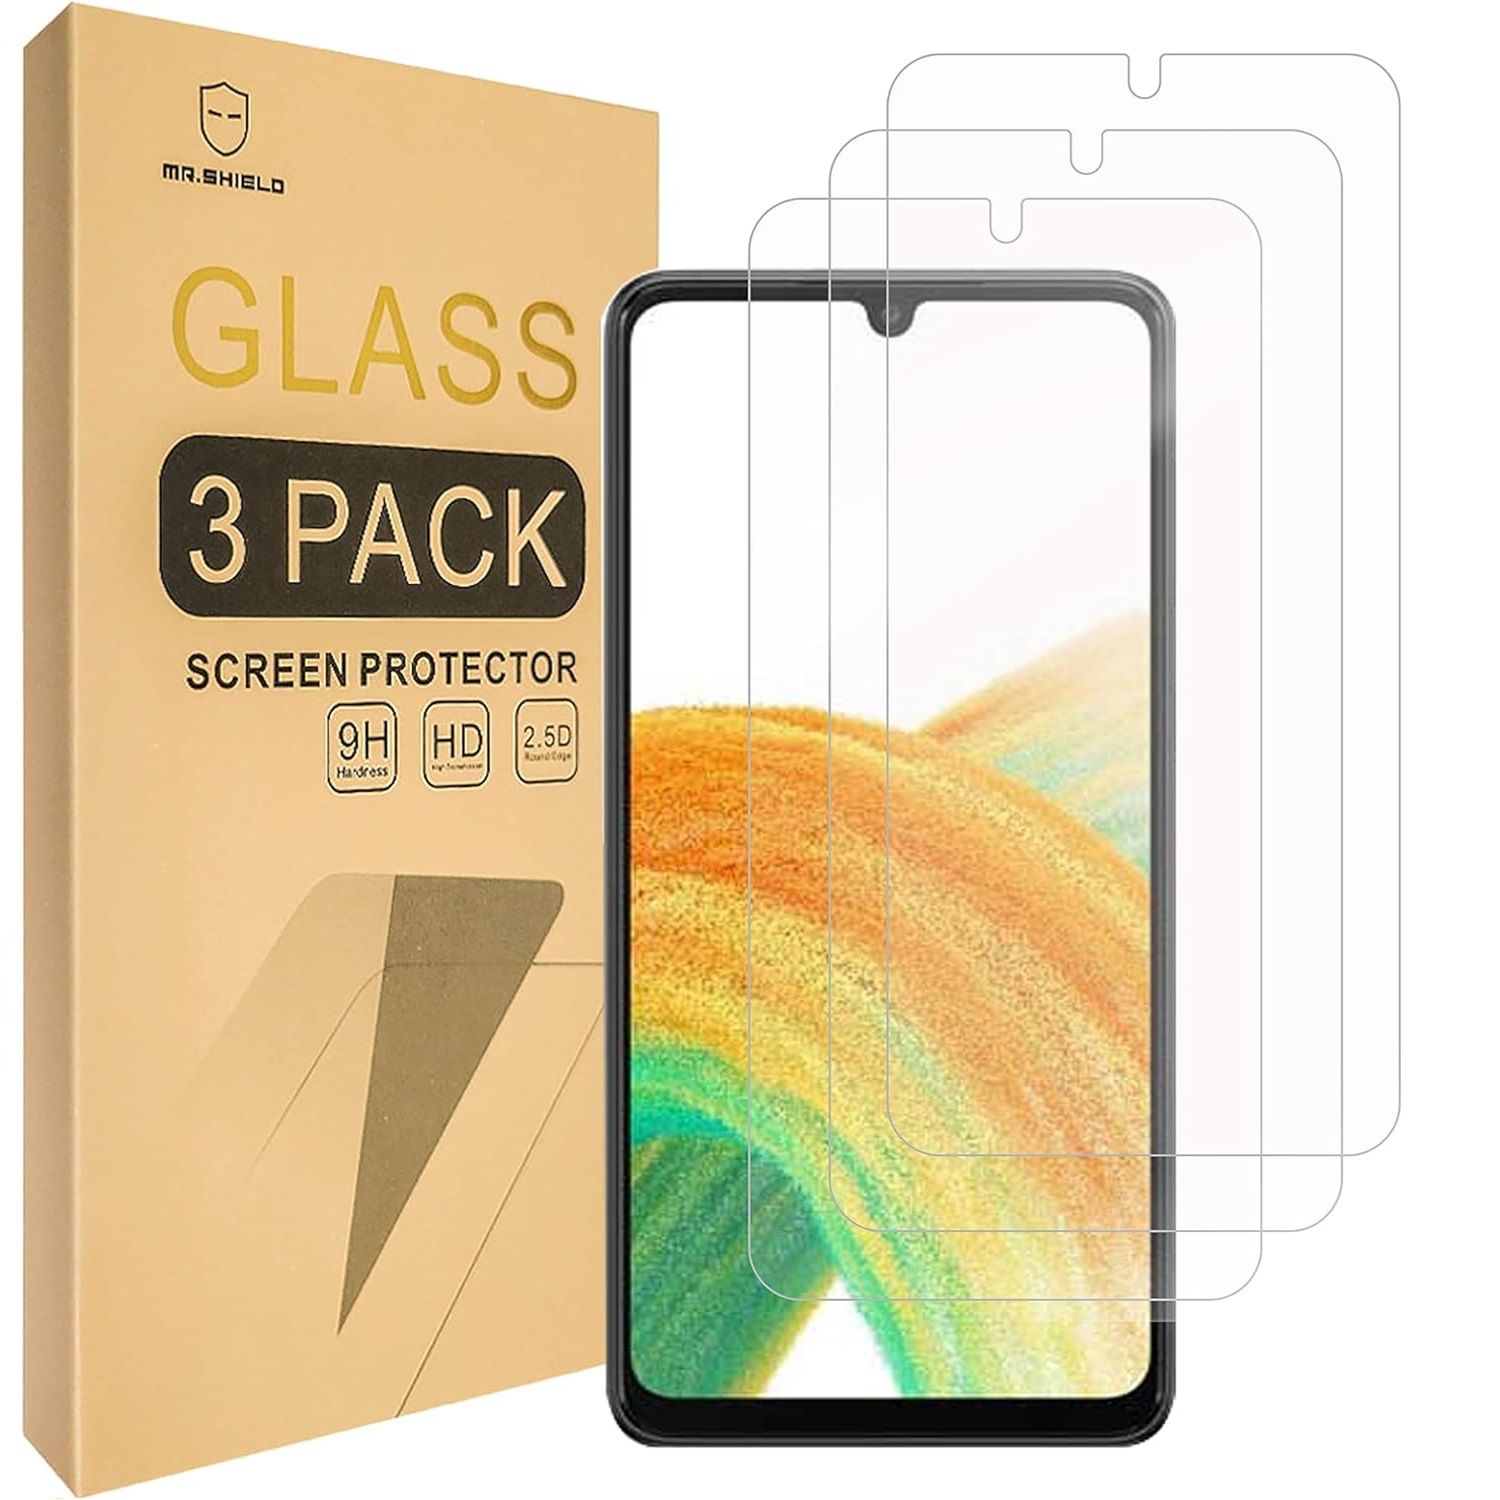 Mr.Shield Tempered Glass Screen Protector for Galaxy A25 5G beside packaging